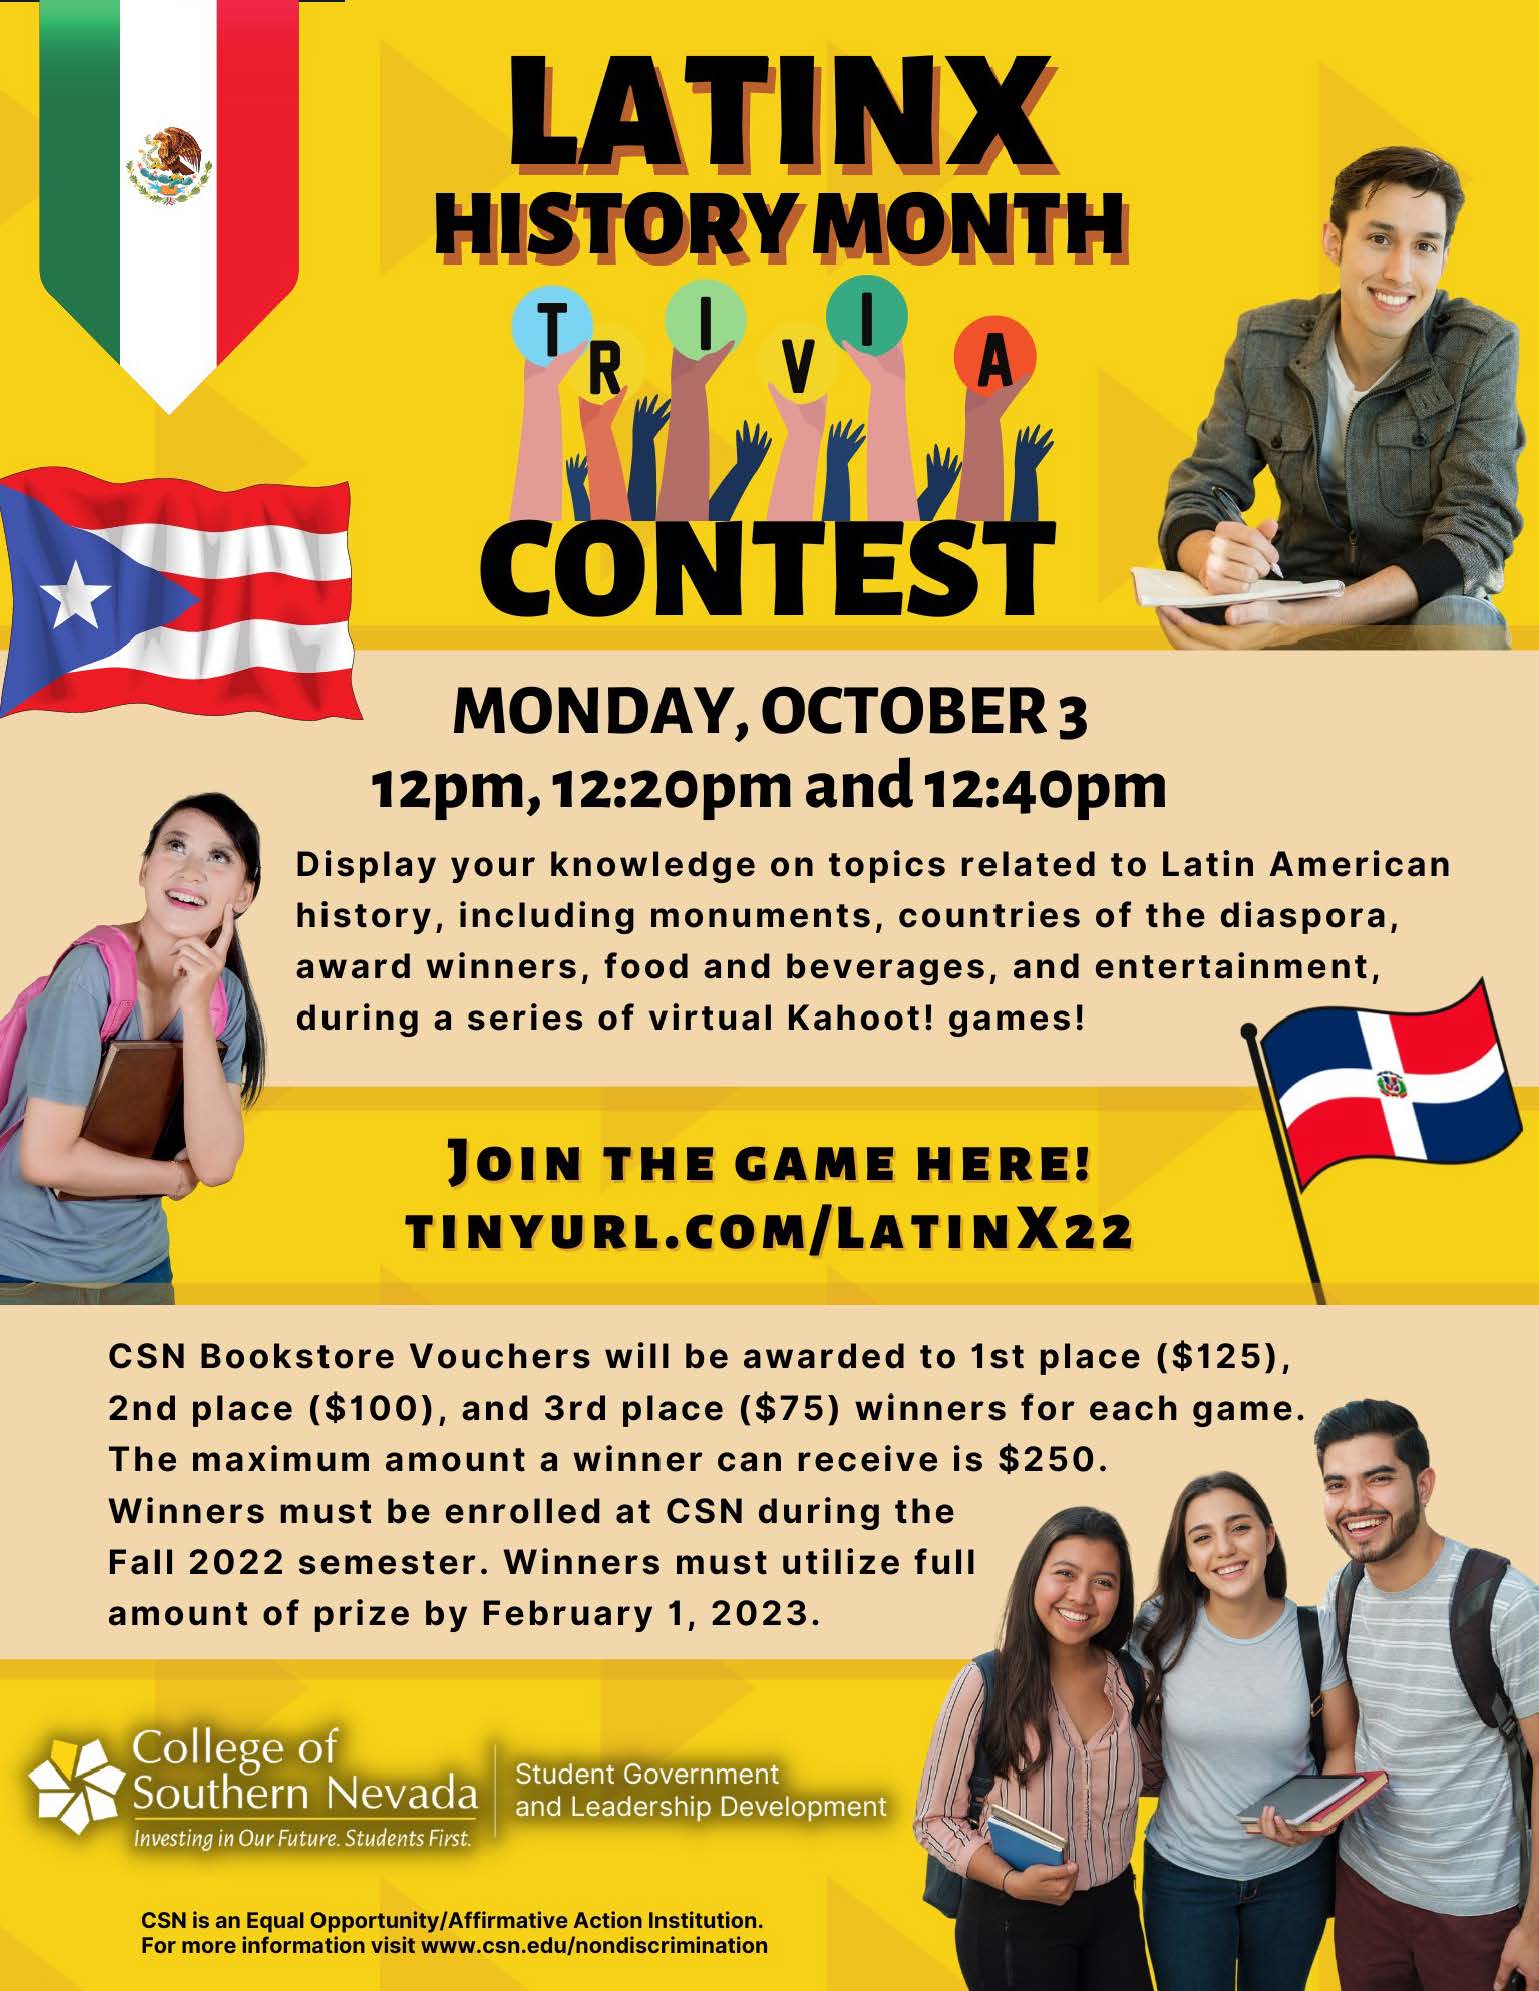 Display your knowledge on topics related to Latin American history during a series of virtual games.